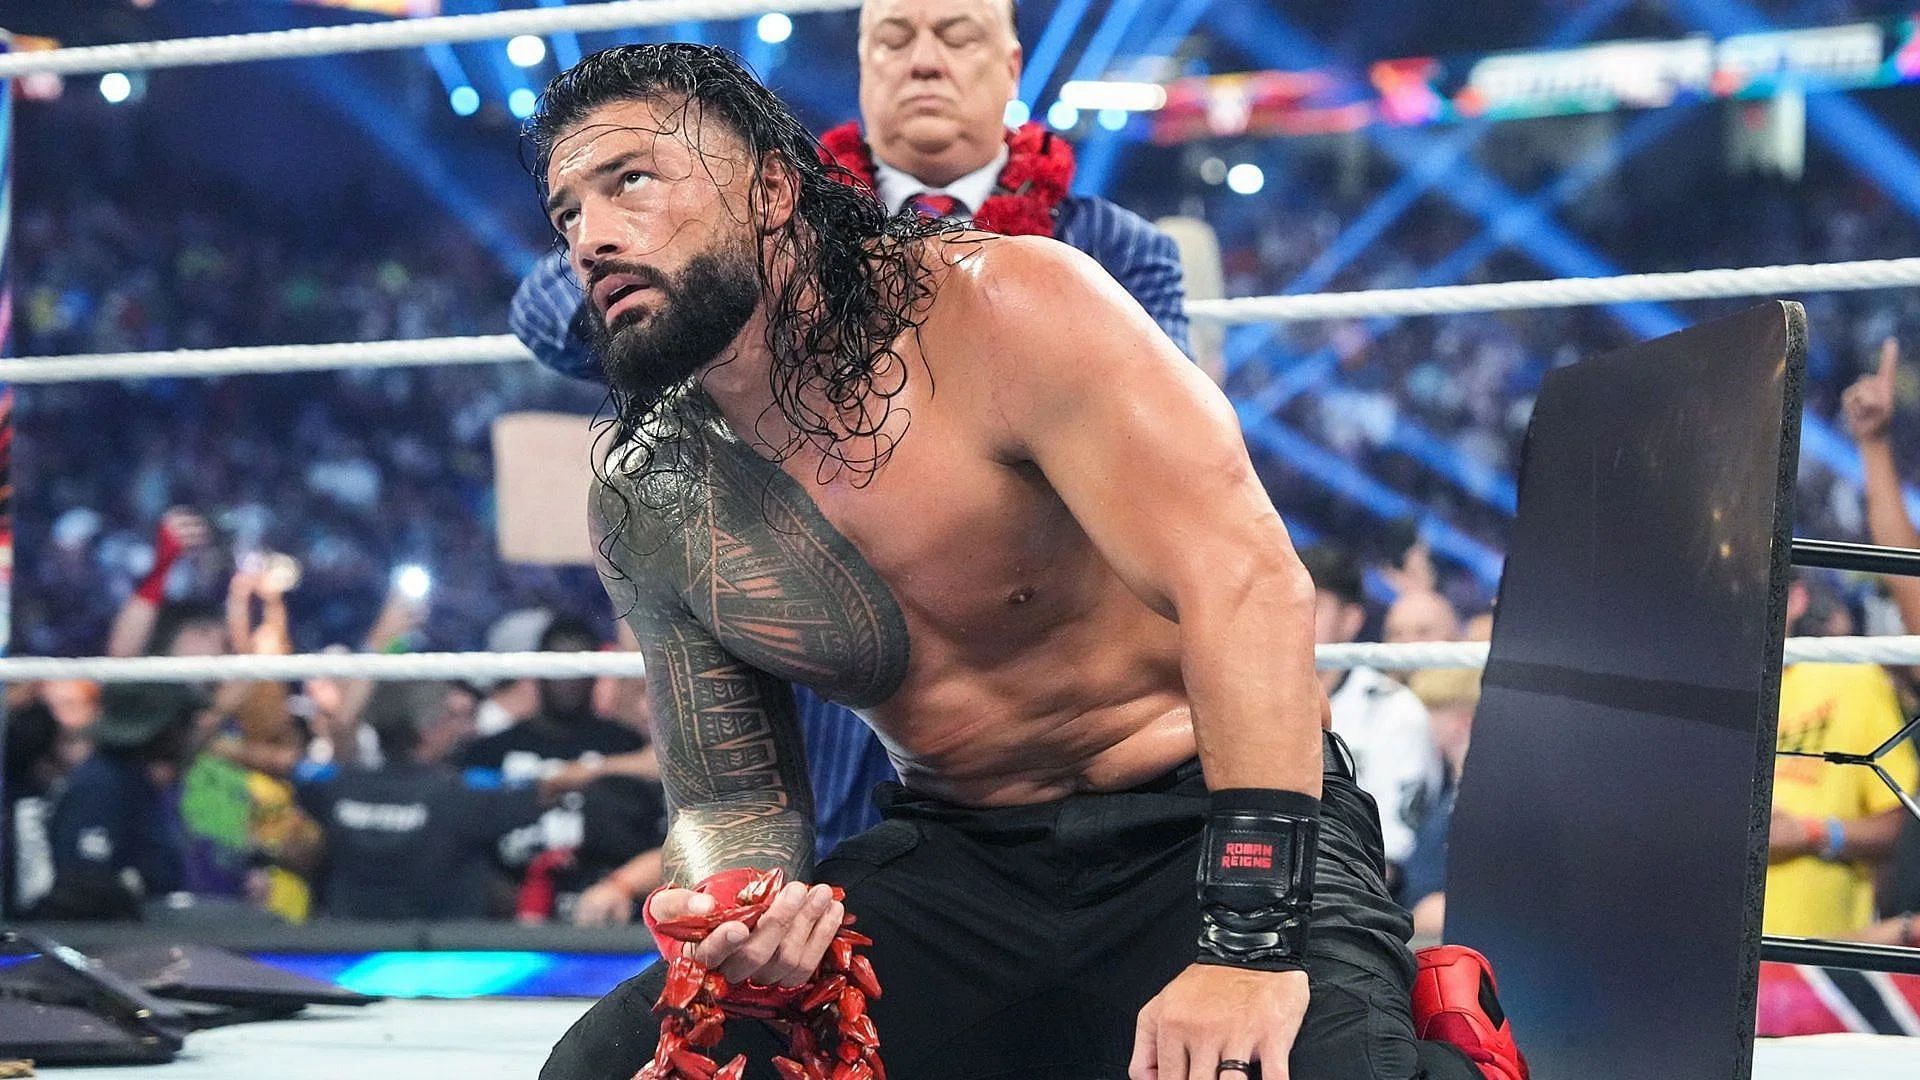 Will Roman Reigns lose his title before The Royal Rumble